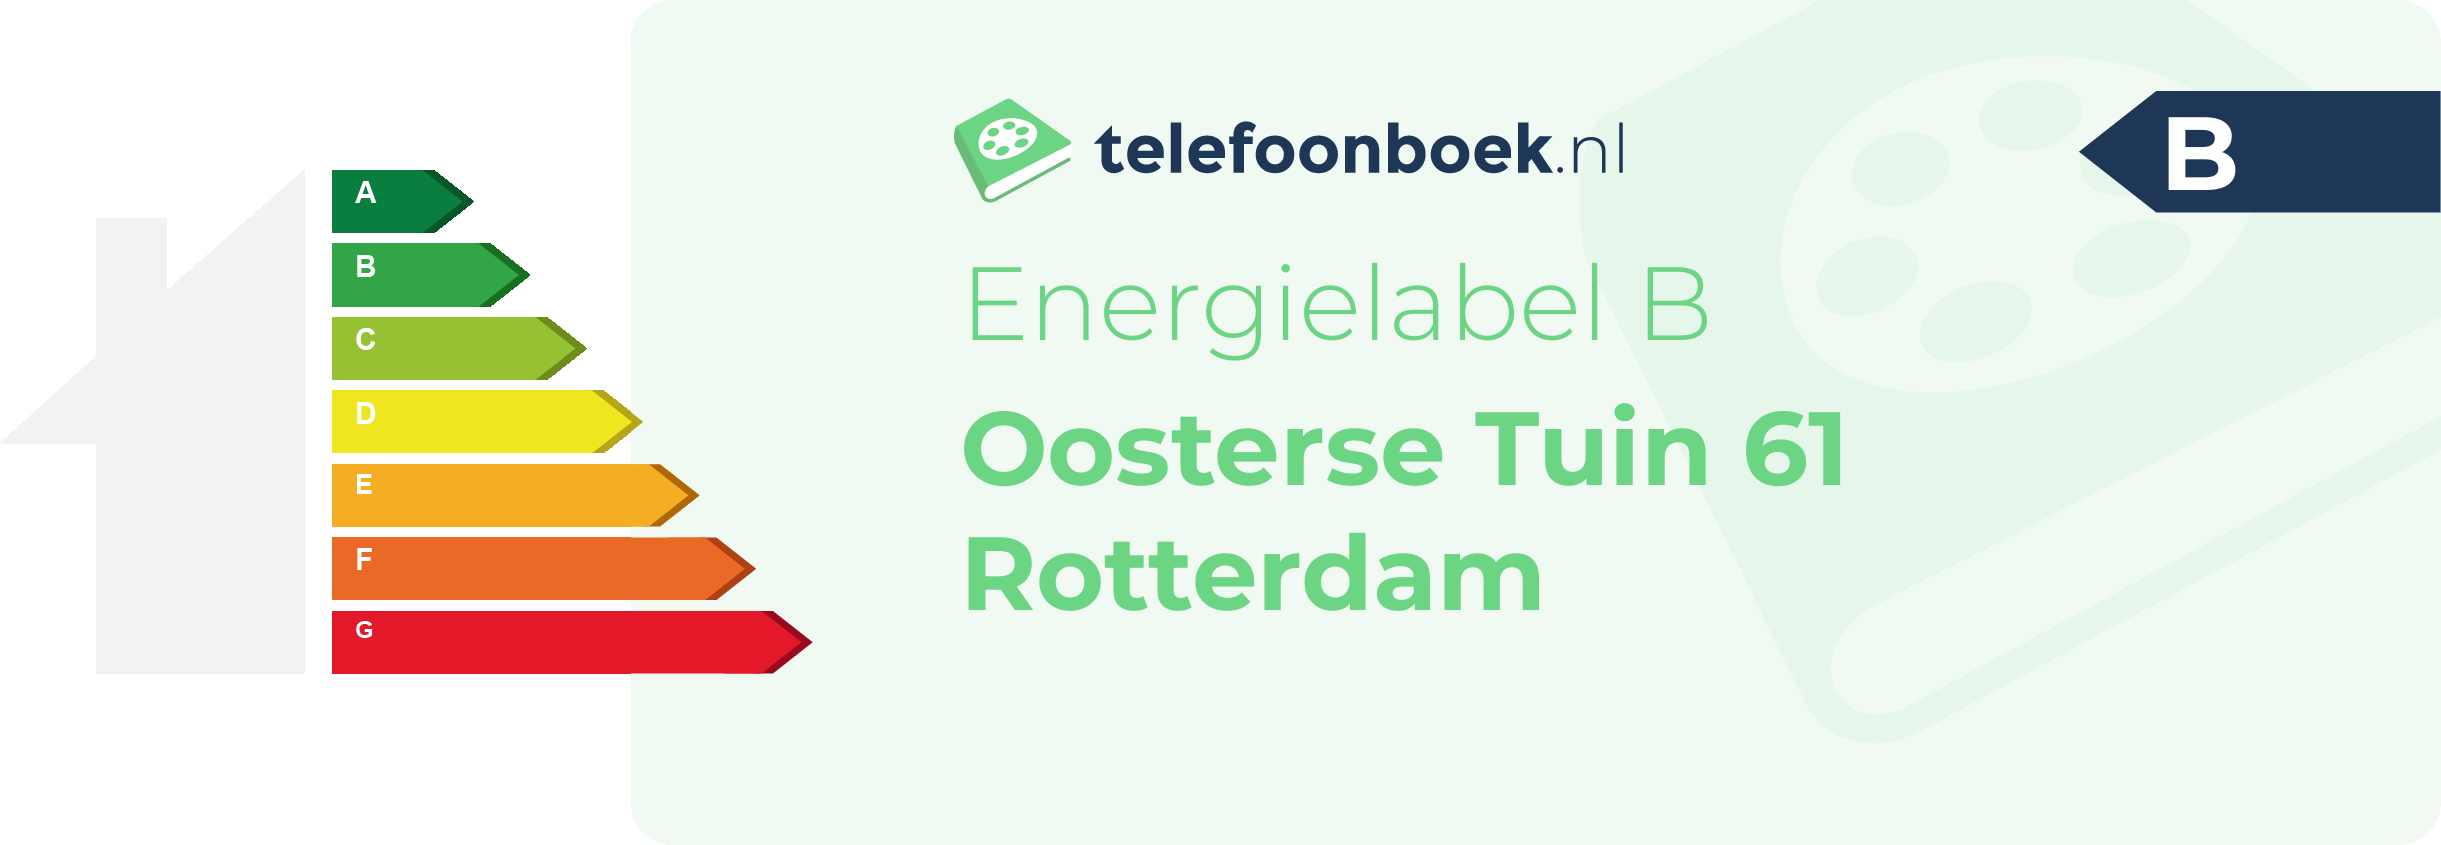 Energielabel Oosterse Tuin 61 Rotterdam